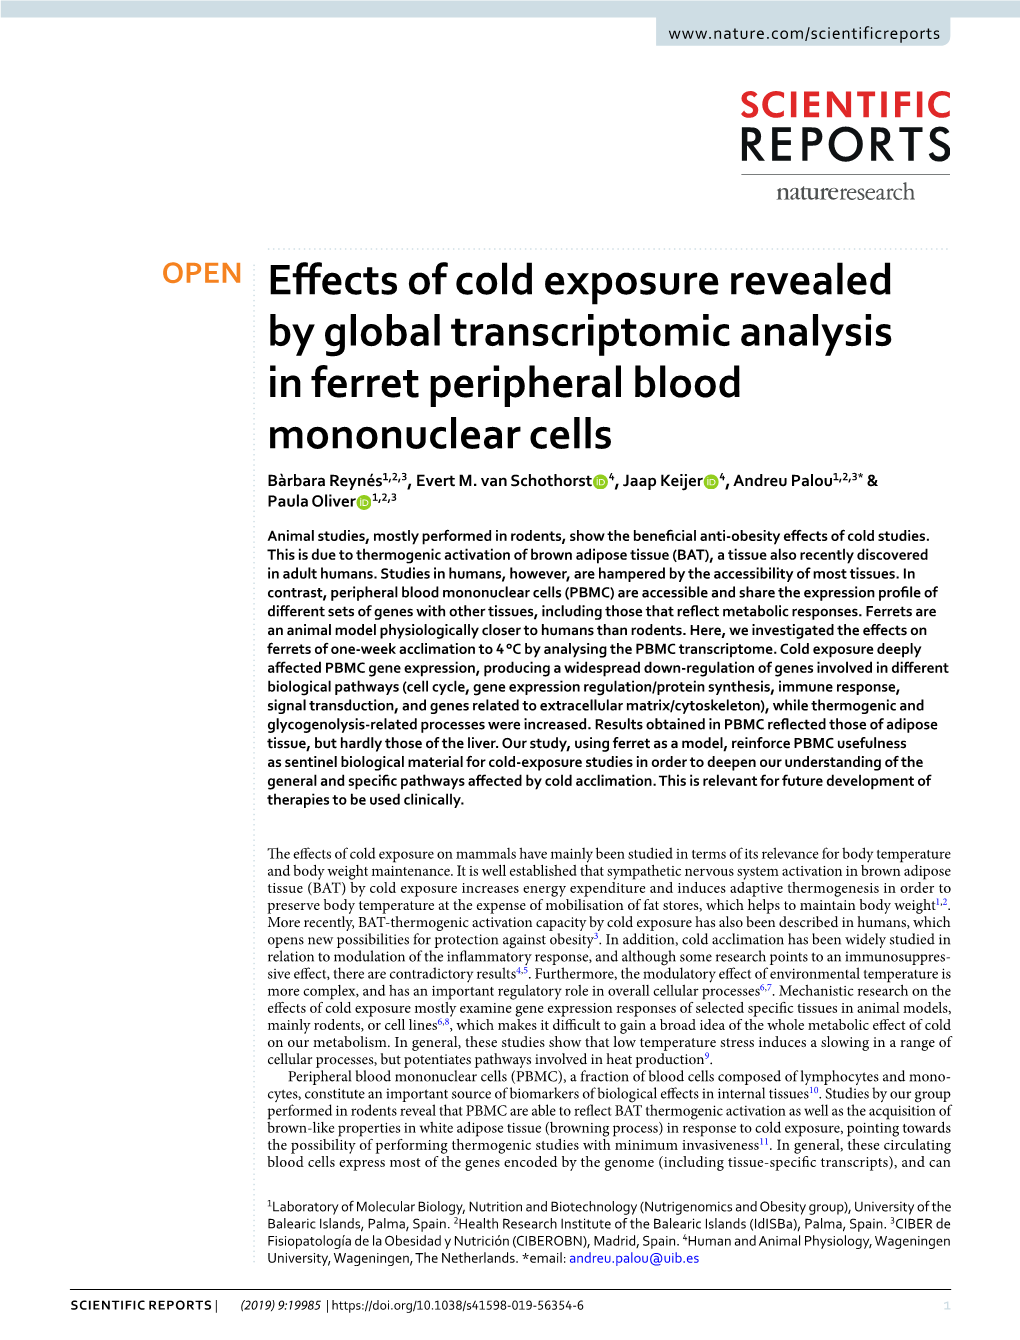 Effects of Cold Exposure Revealed by Global Transcriptomic Analysis In